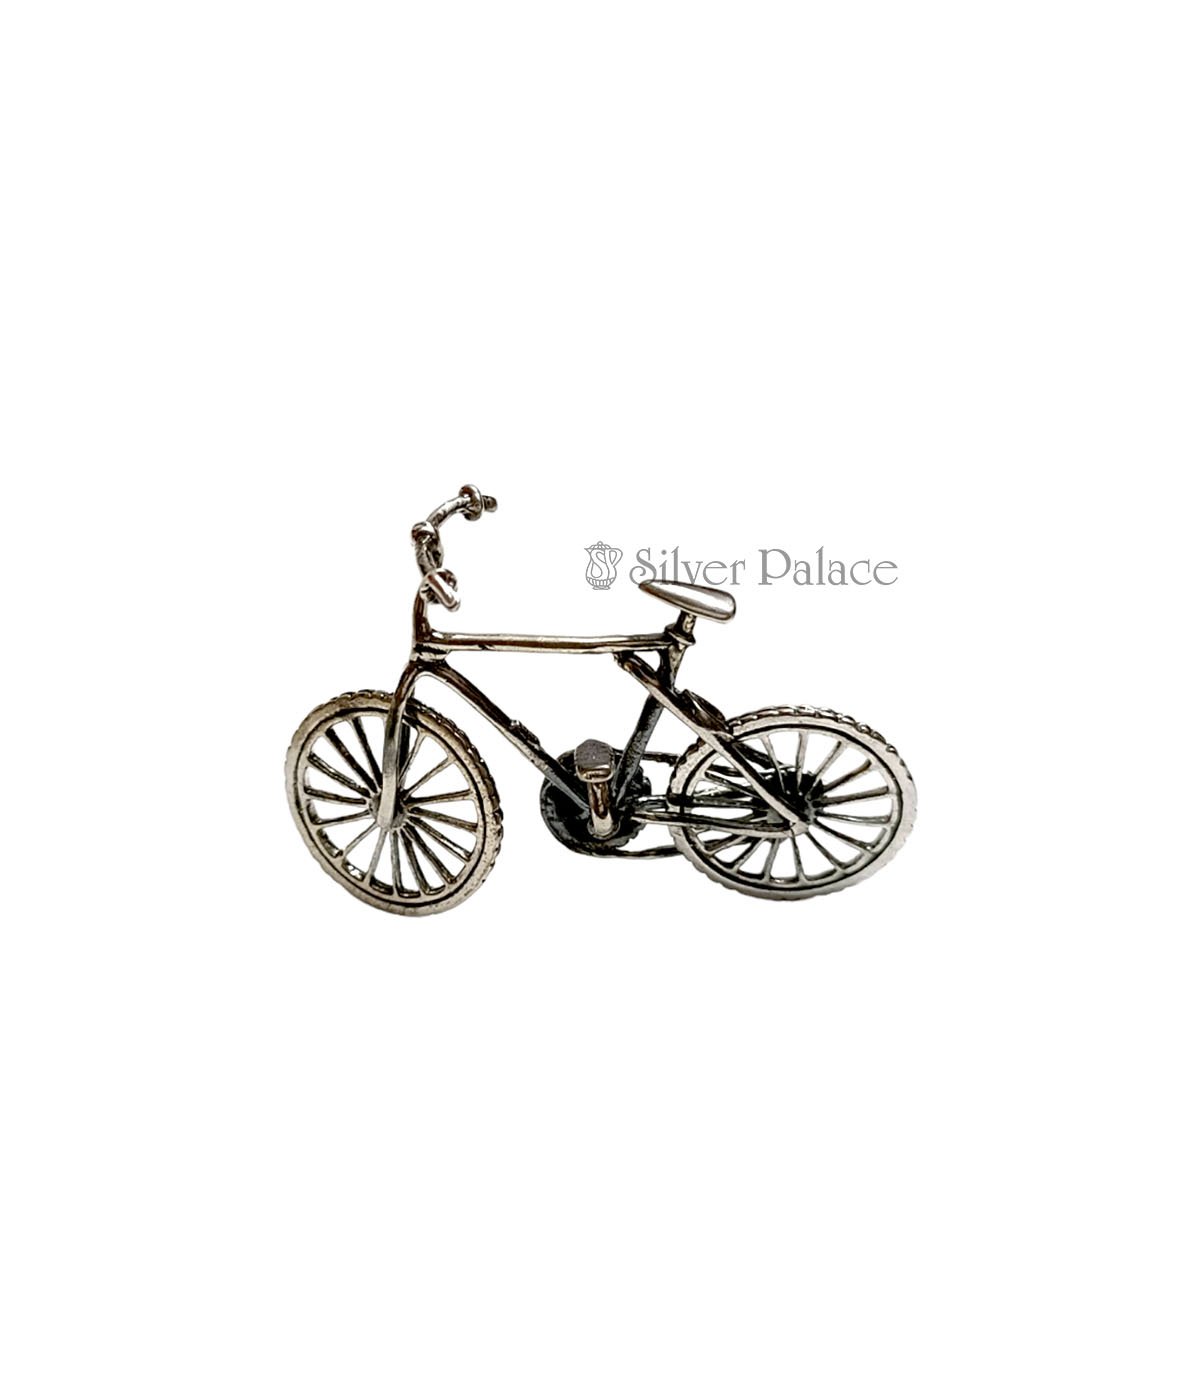 STERLING SILVER MINIATURE CYCLE GIFT